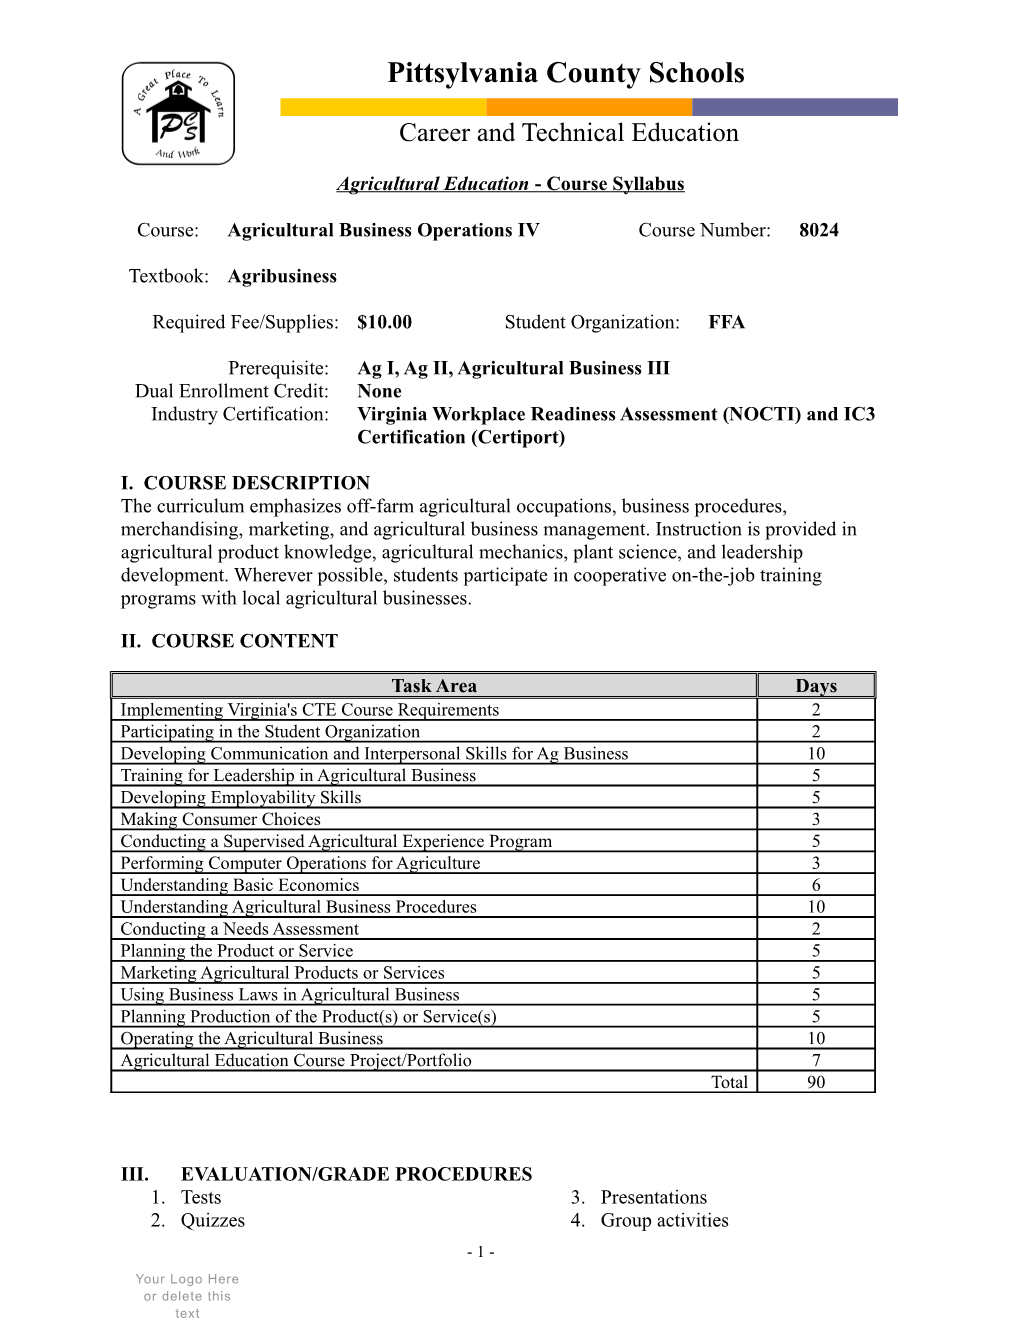 Agricultural Education Course Syllabus s2